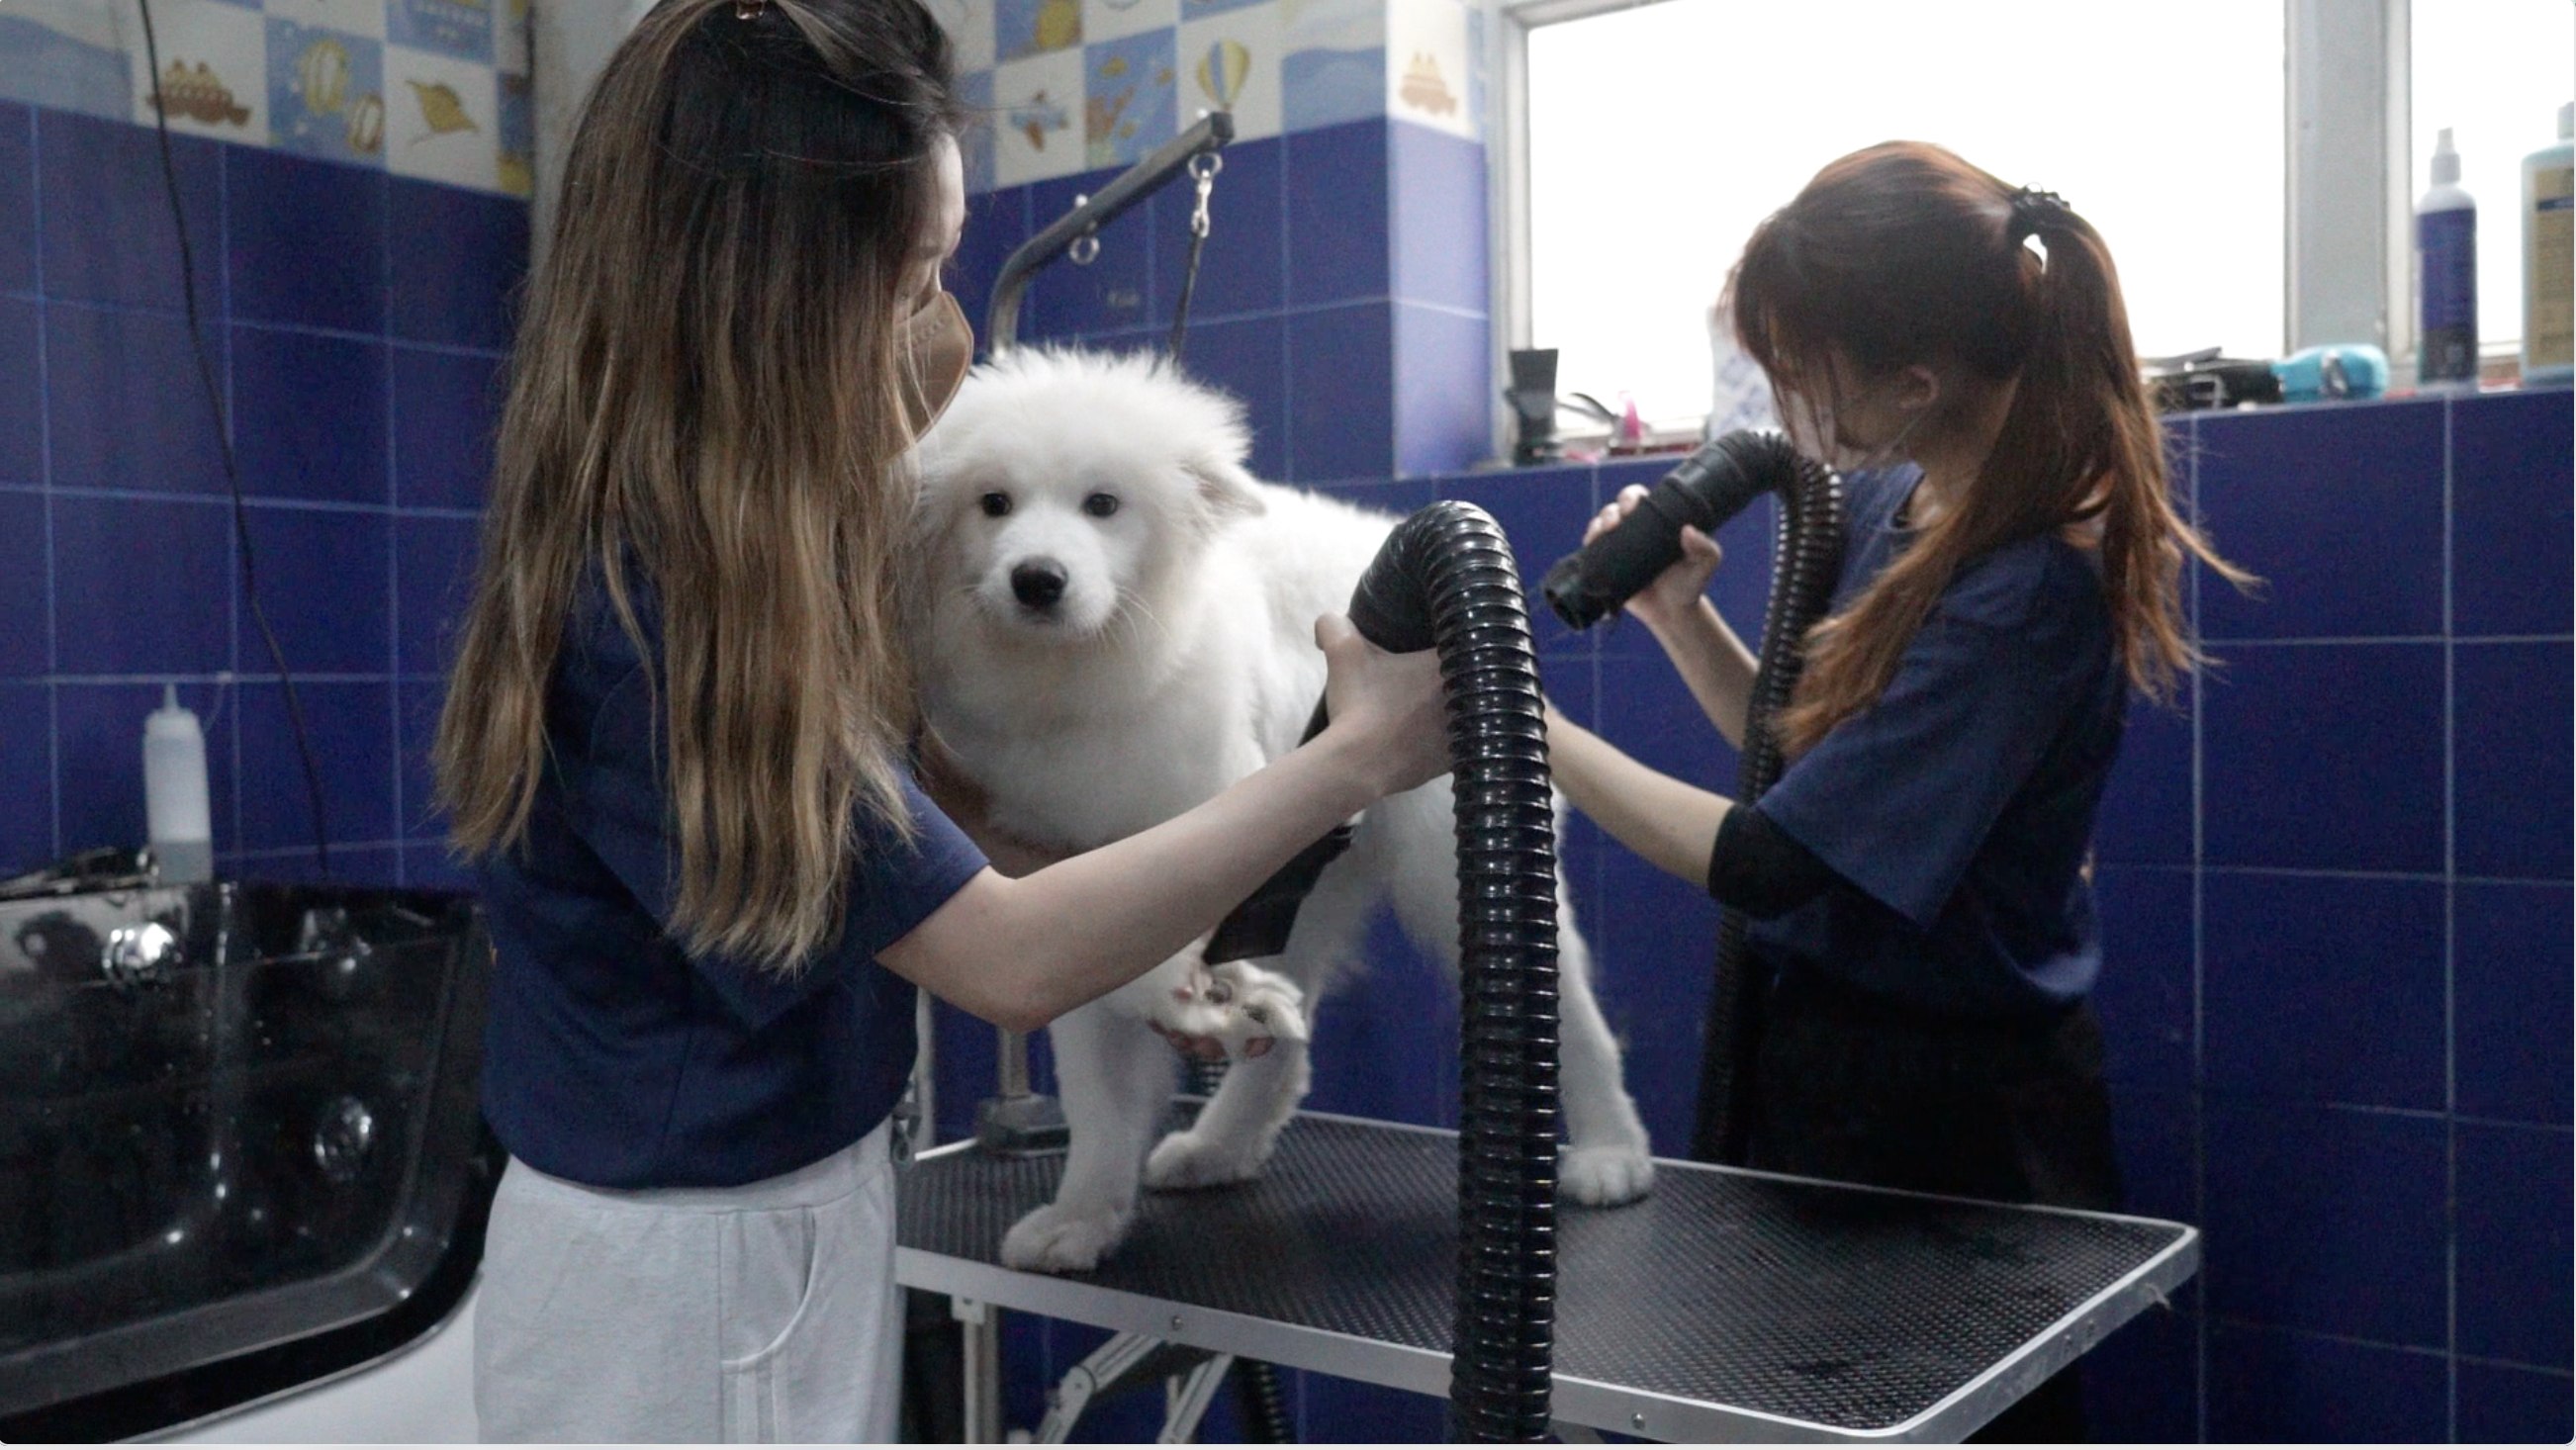 On Dog Dog Cafe - Pet Interaction Experience | Pet Grooming | Kwai Chung